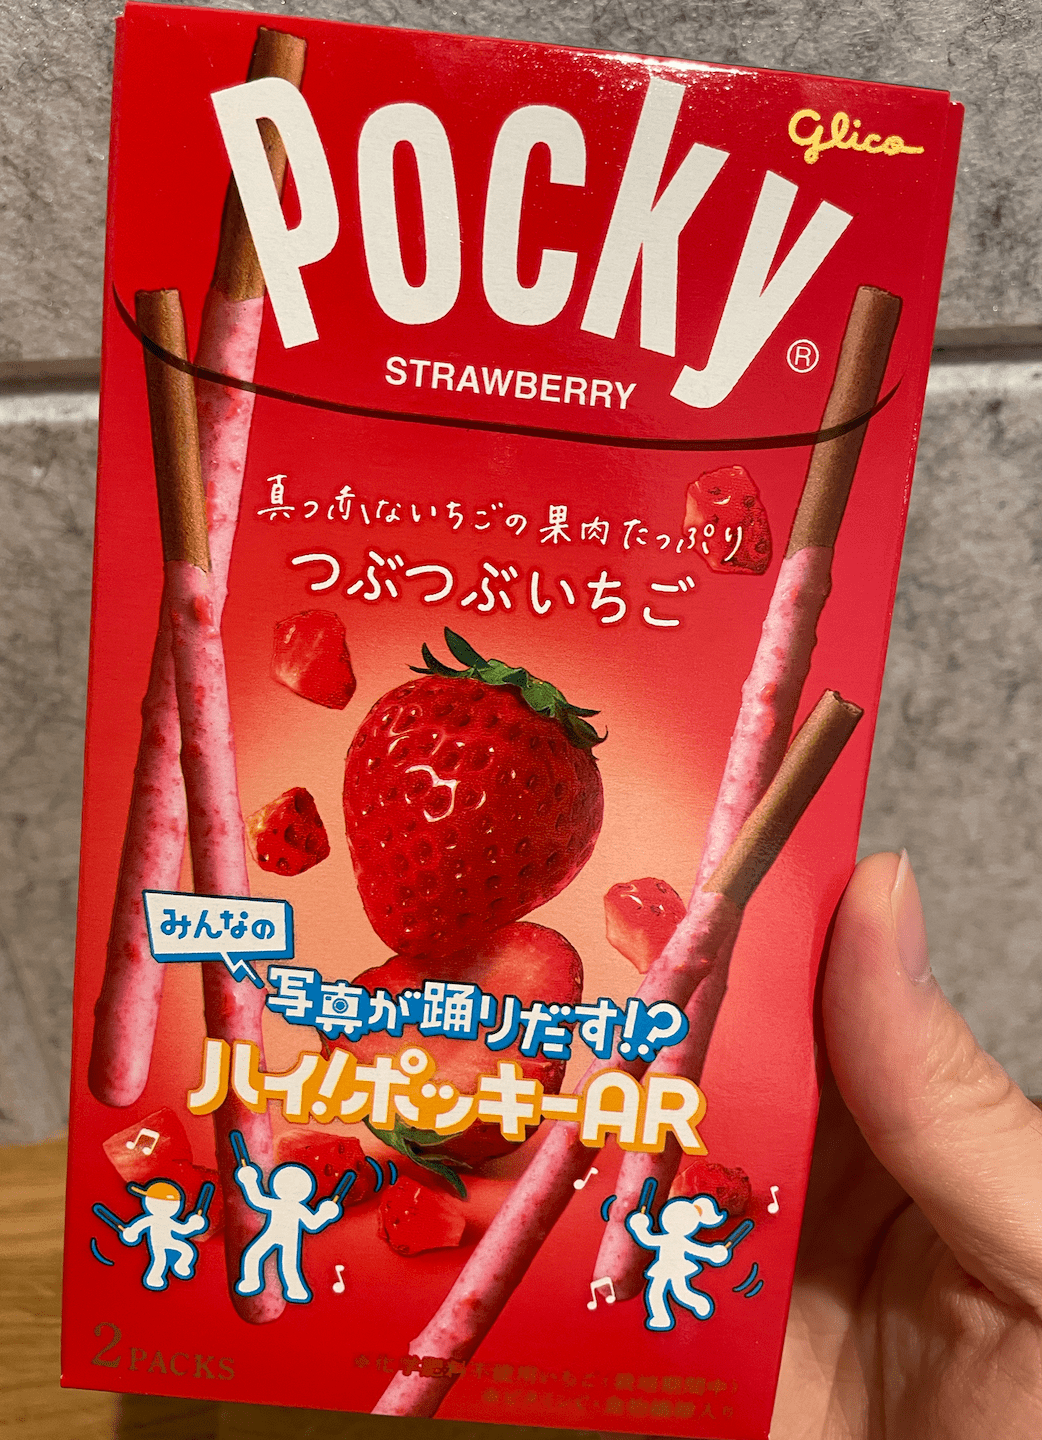 Actual product image of Pocky-Strawberry 1